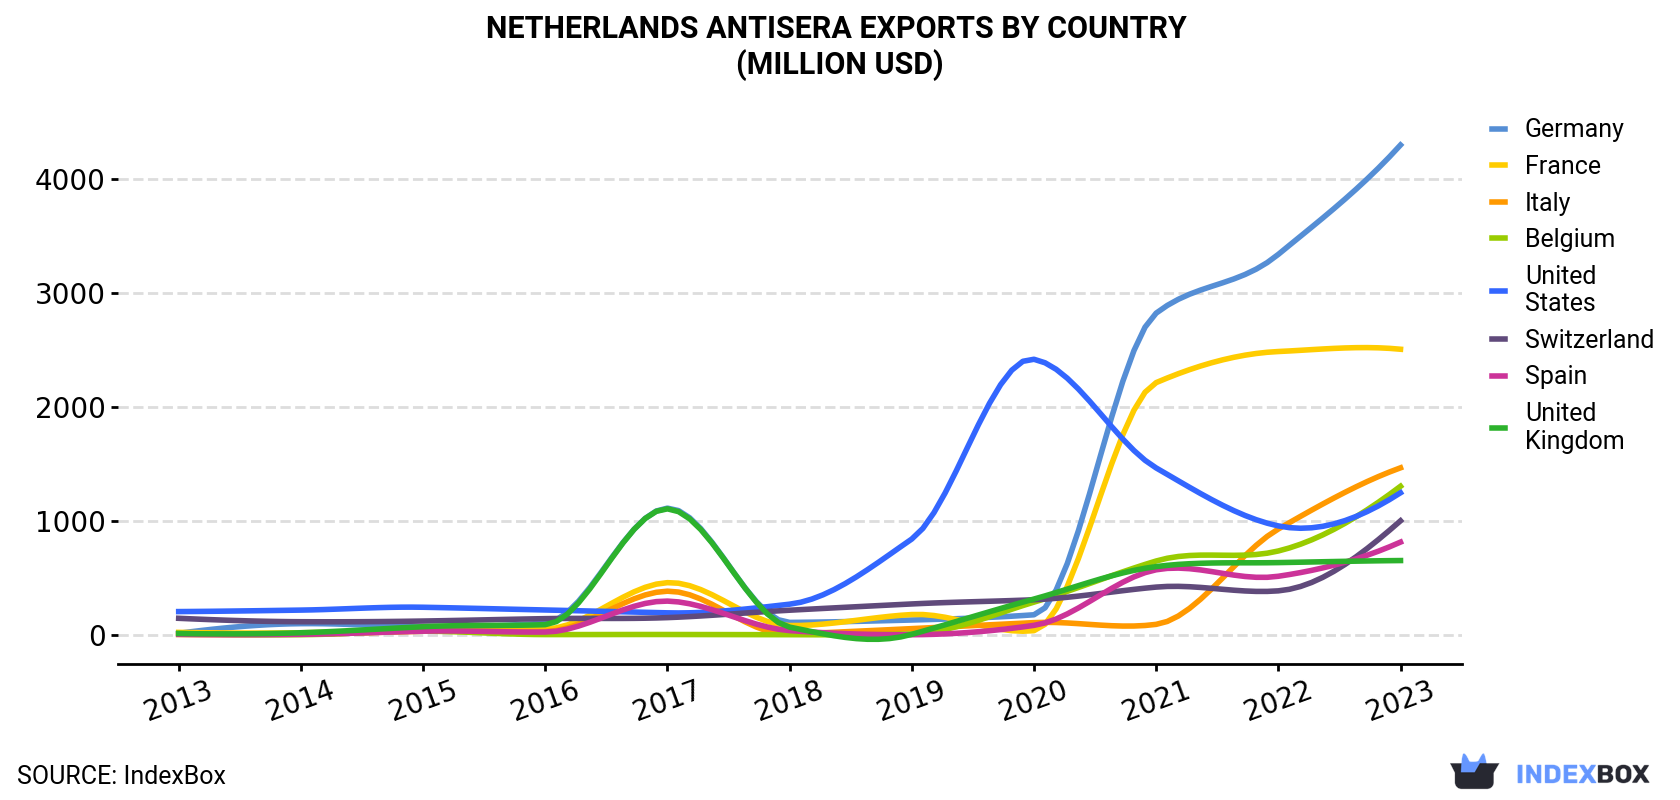 Netherlands Antisera Exports By Country (Million USD)